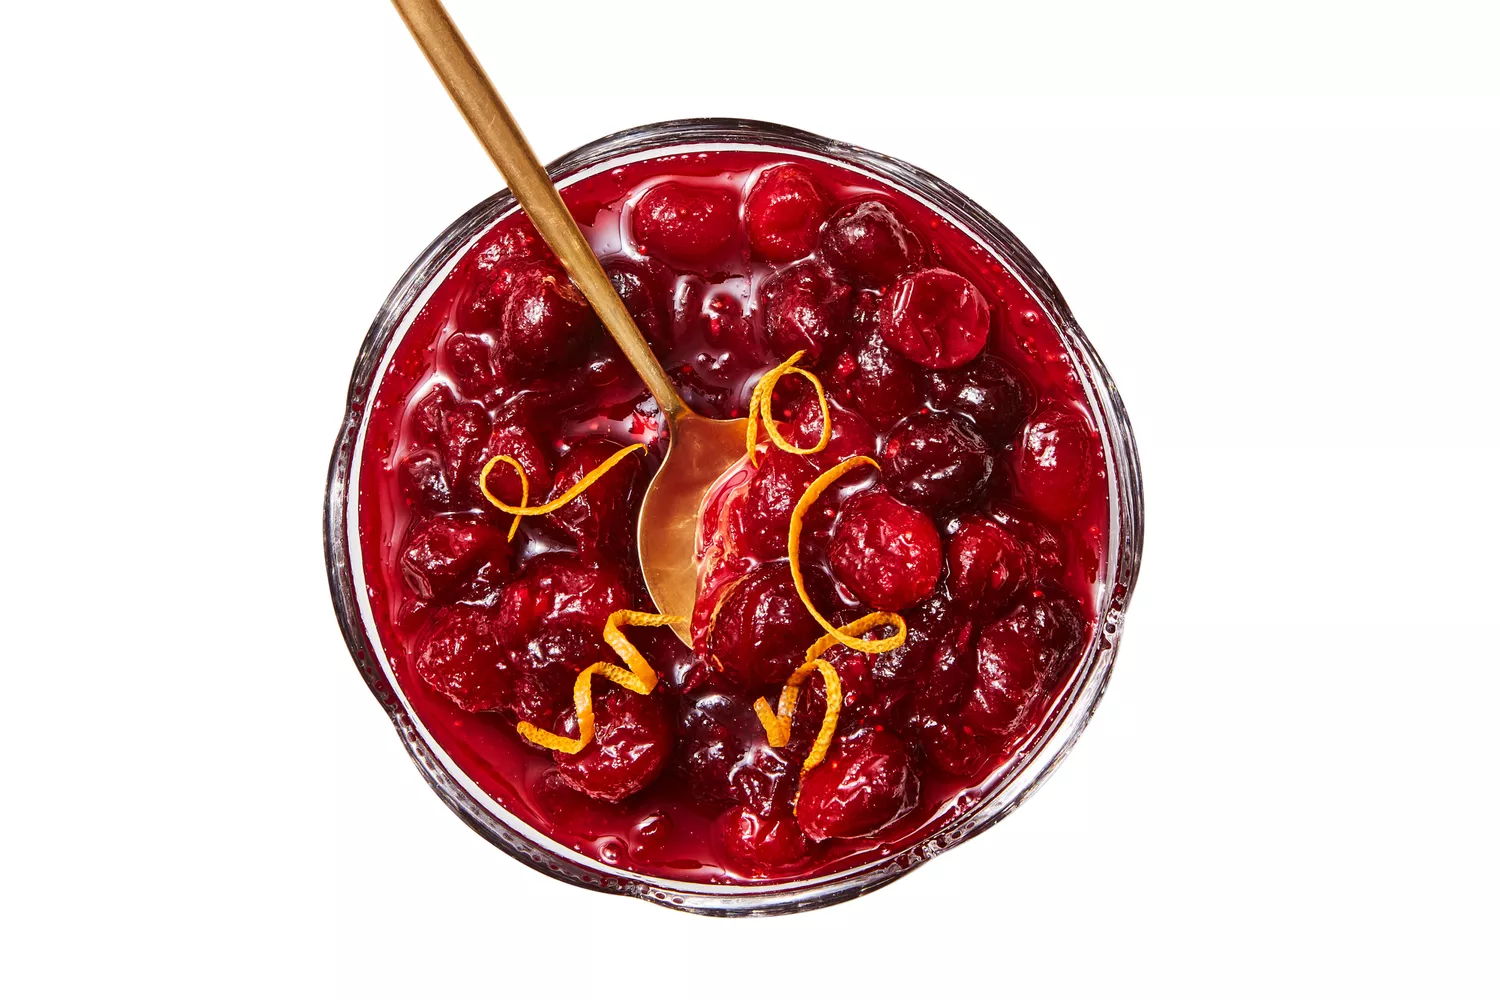 Southern Living Gingered Cranberry Sauce in a bowl to serve